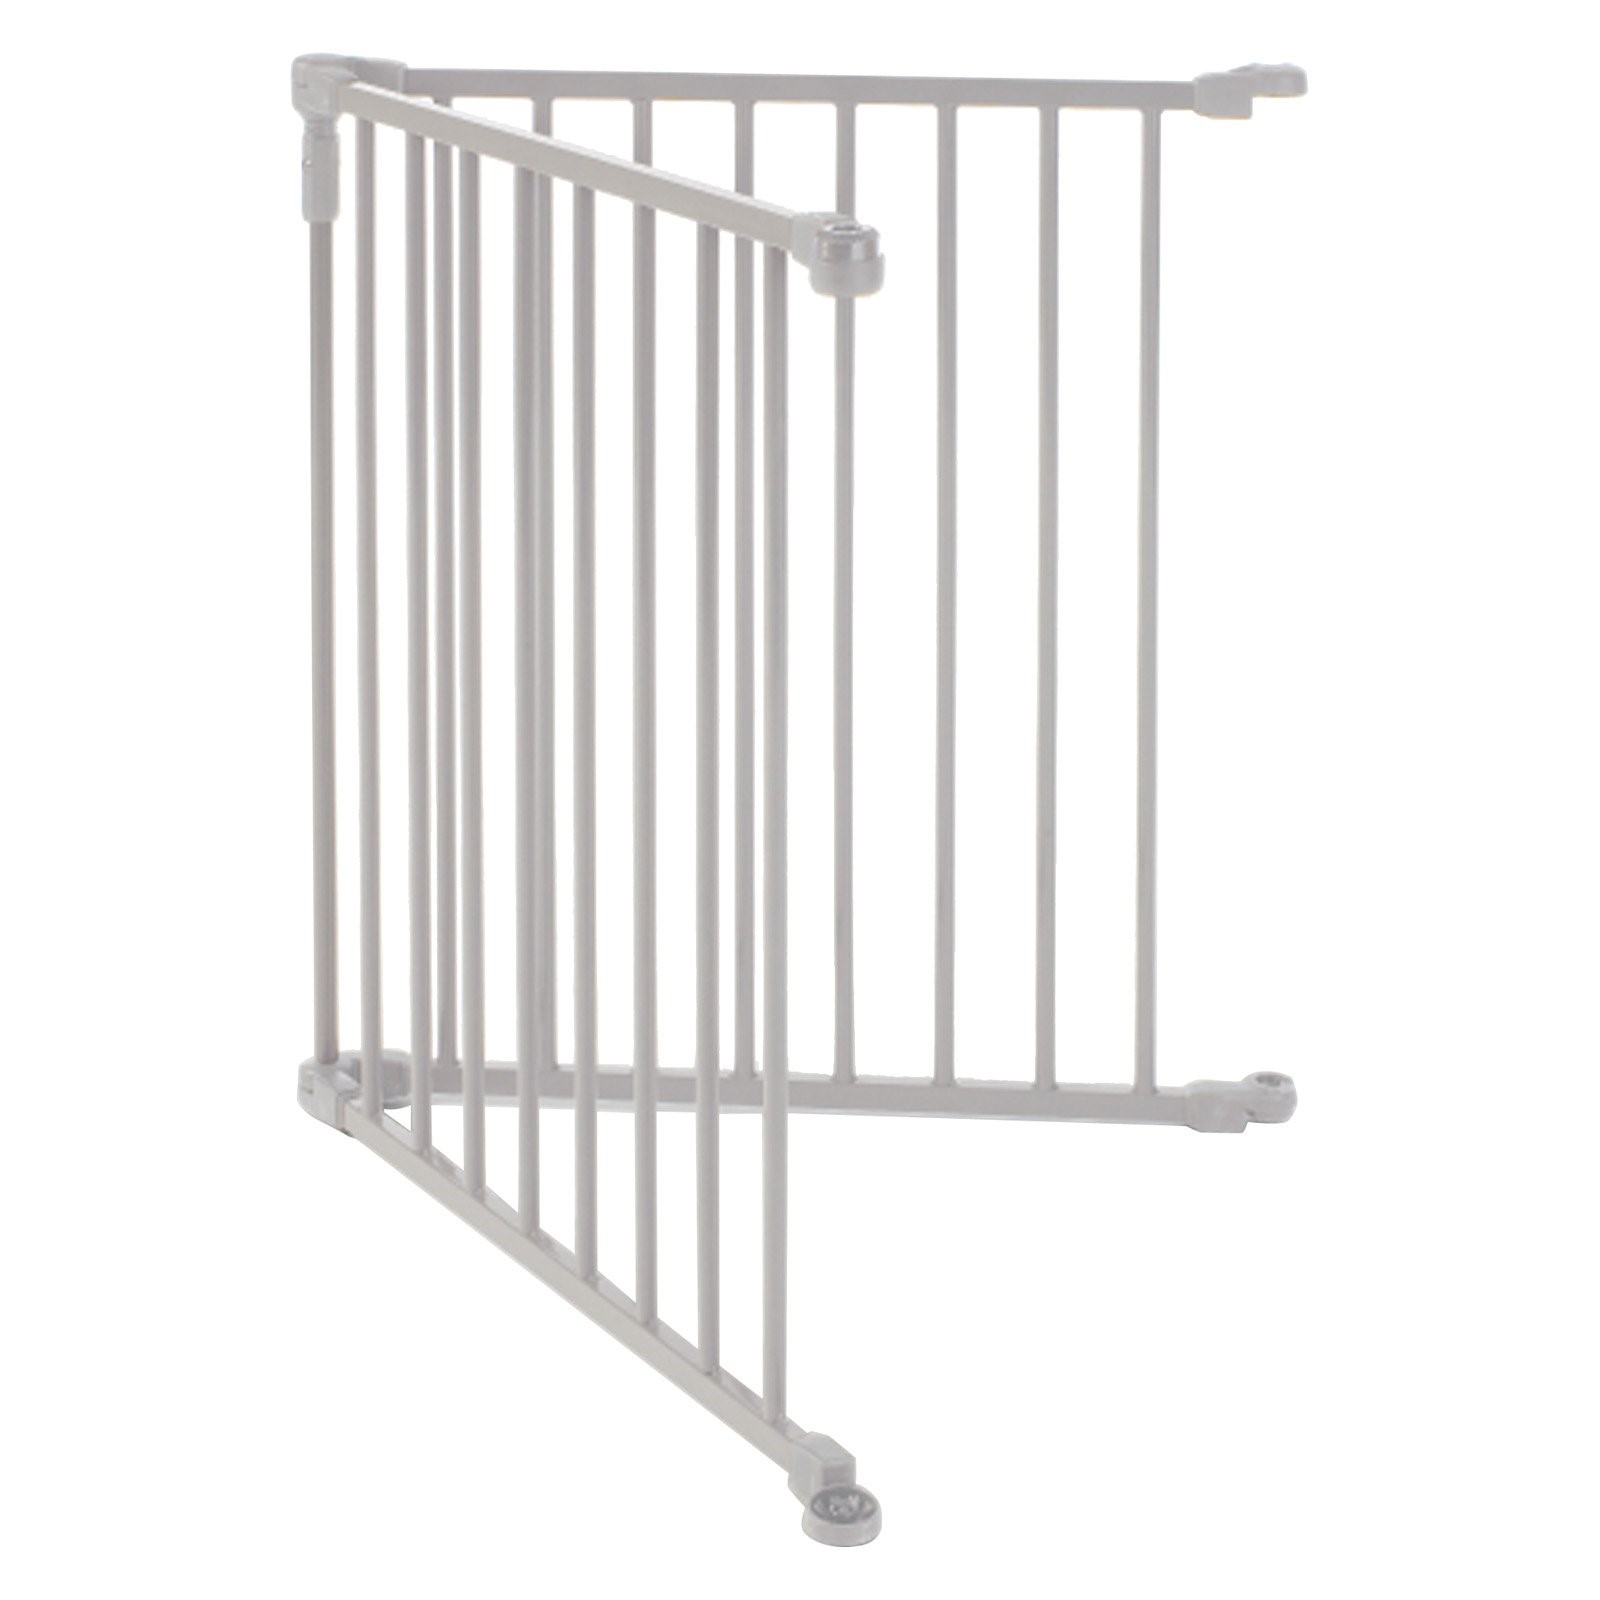 Toddleroo by North States 3-in-1 Superyard Baby Play Yard Two-Panel Extension, Taupe Metal - image 1 of 5